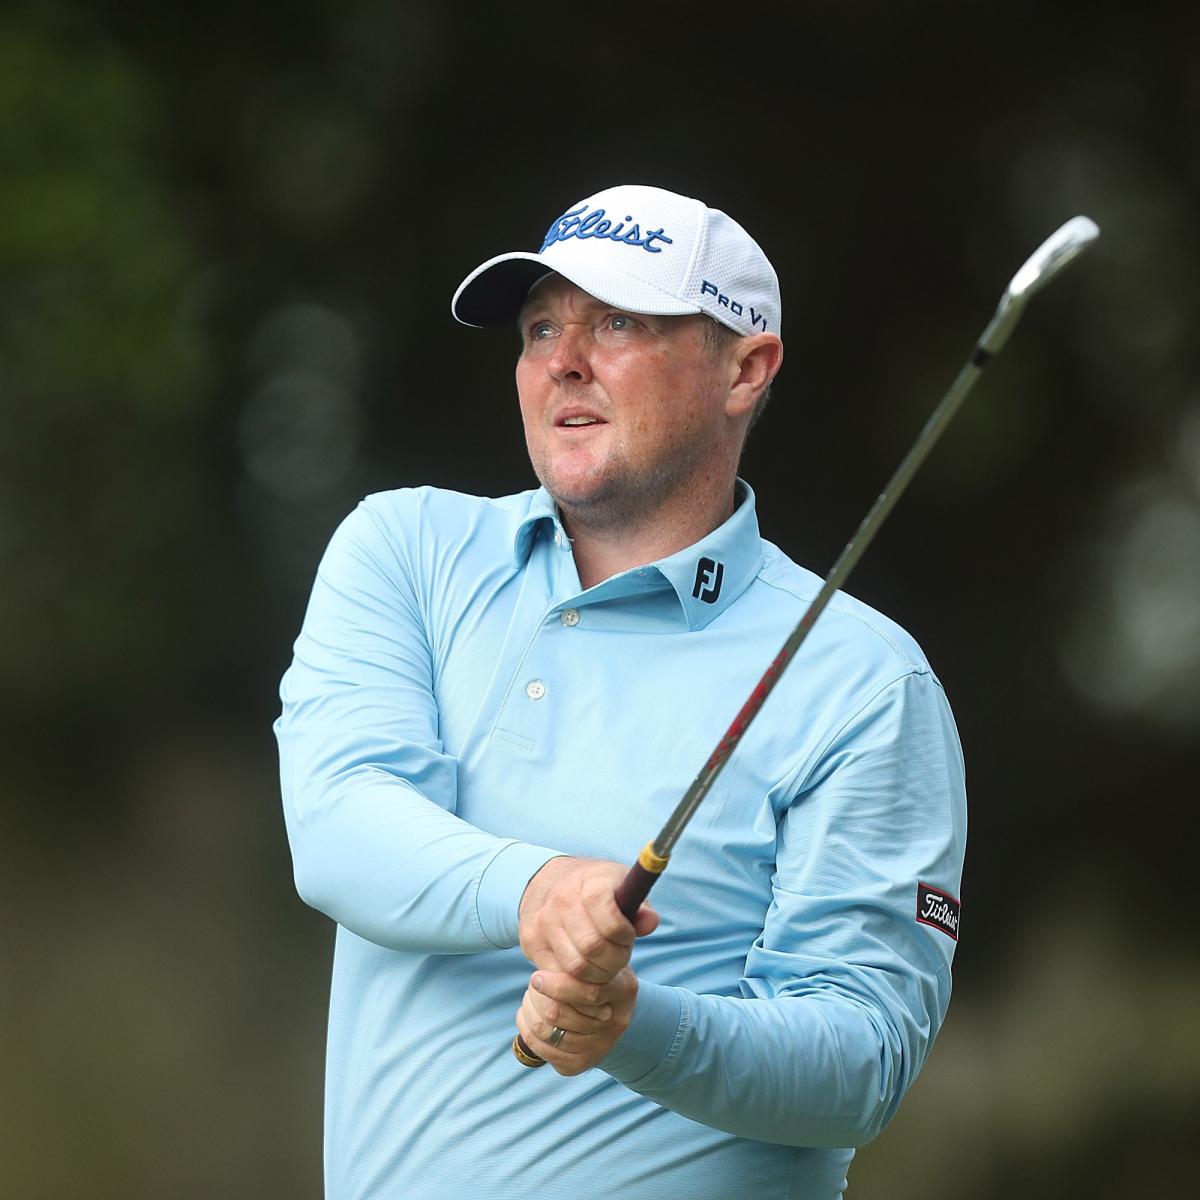 Golfer Lyle Dies from Leukemia at Age 36 | Bleacher Report | Latest Videos Highlights